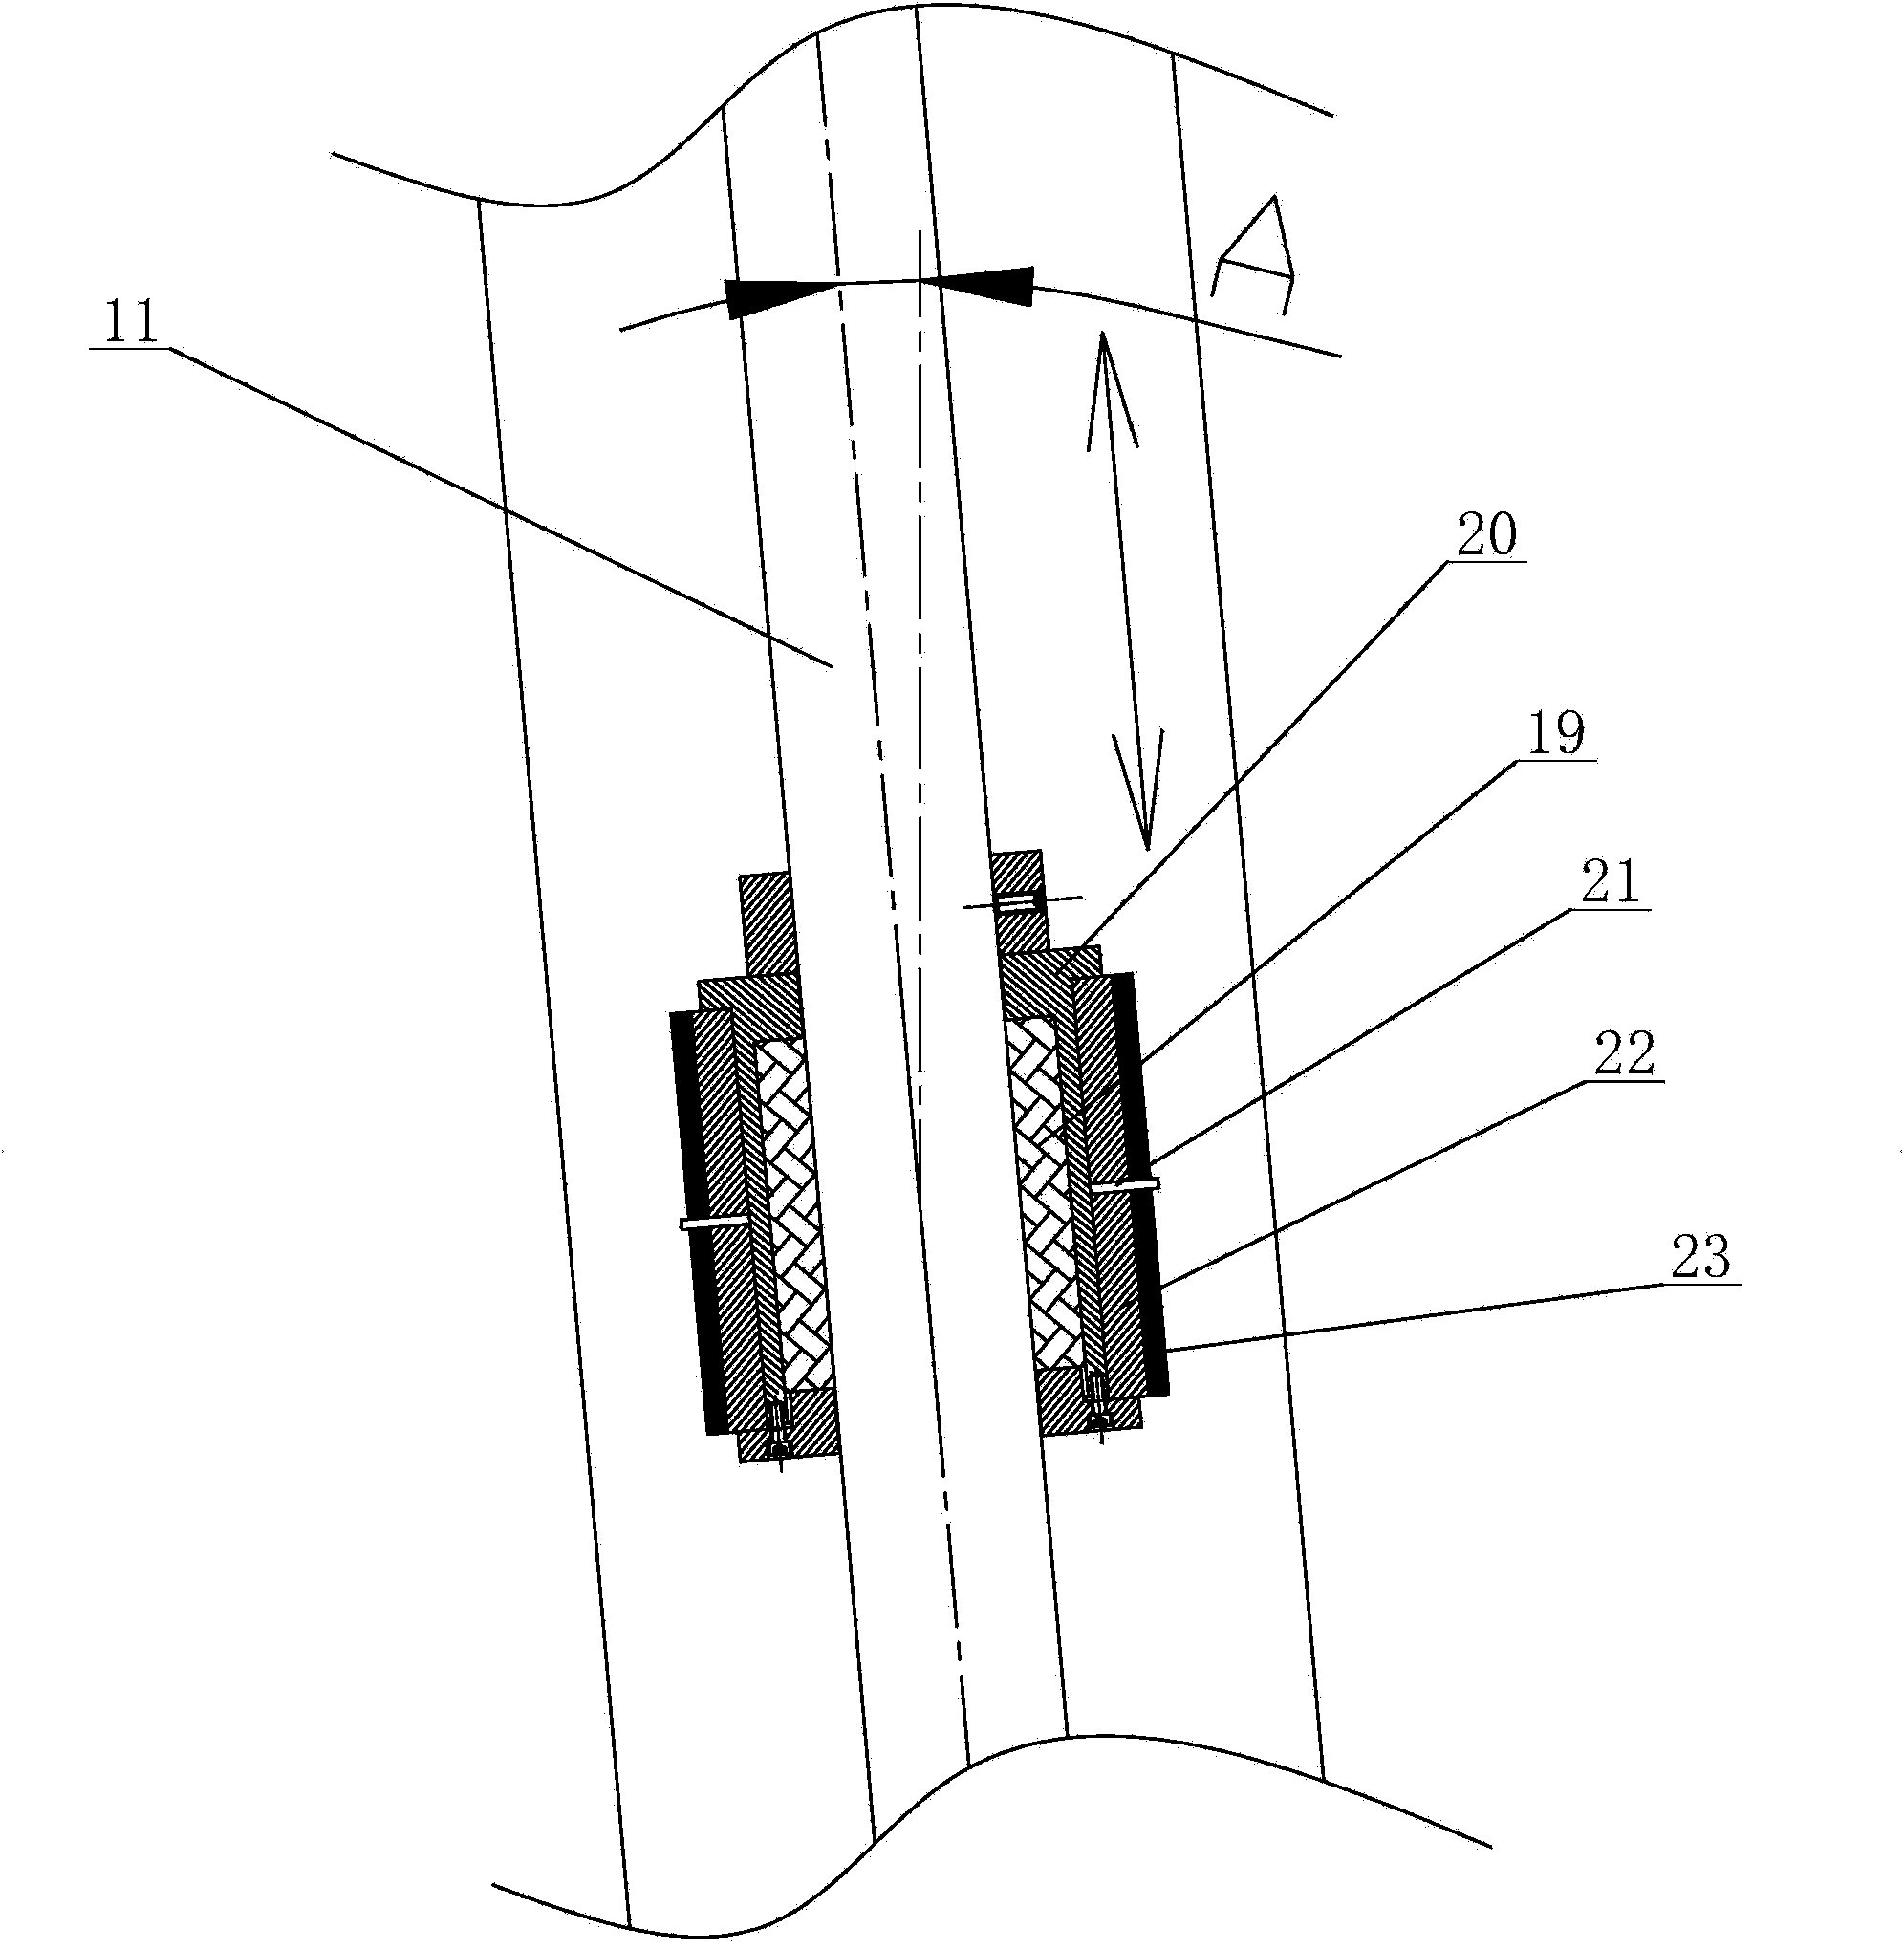 Automatic division slitting mechanism